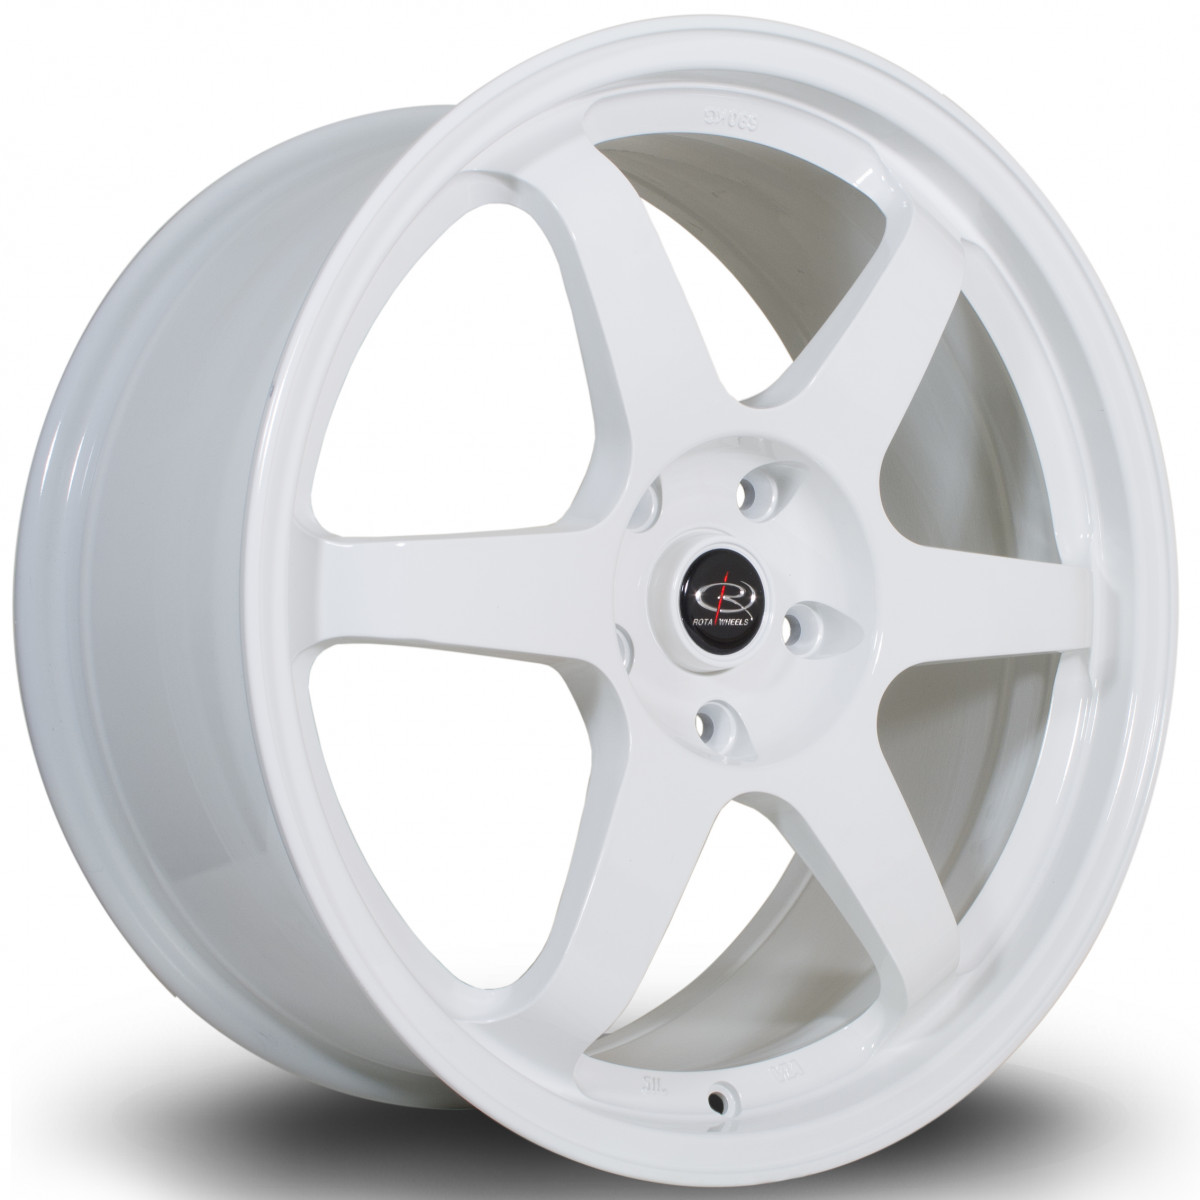 Grid 19x8.5 5x120 ET48 White - Civic Type R Only 